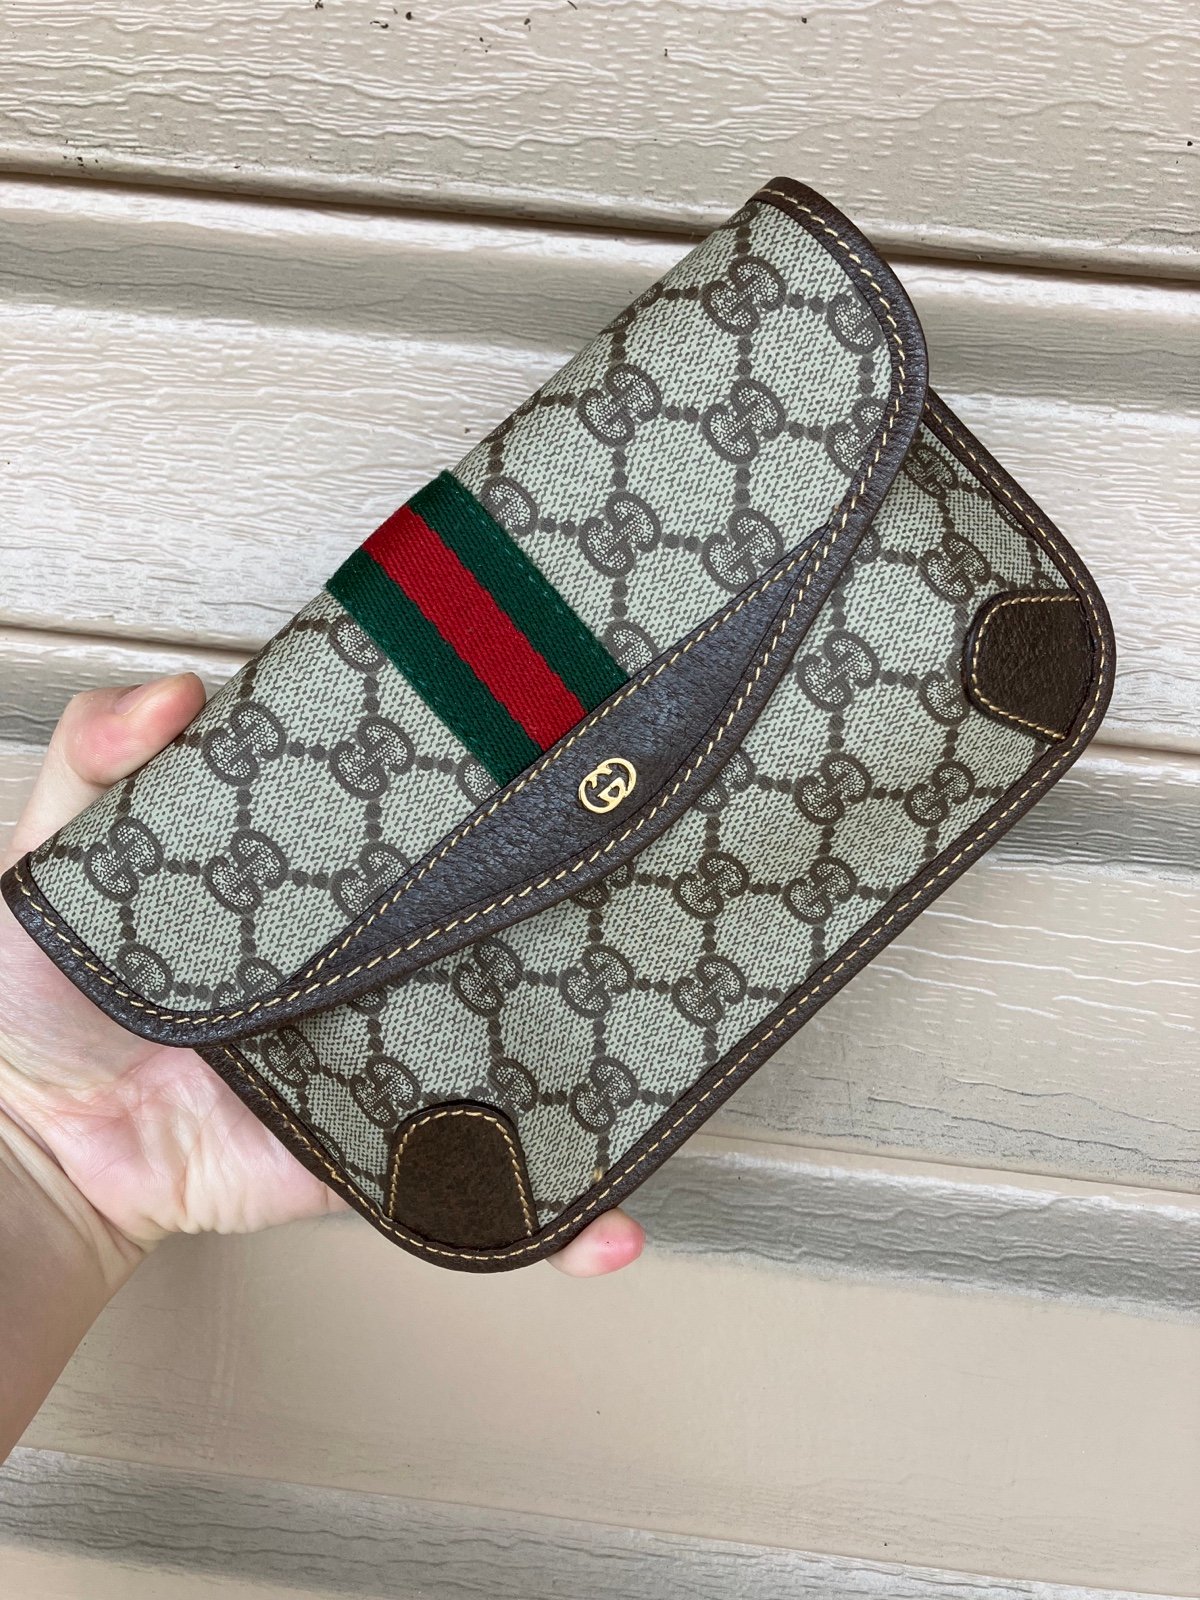 Unused Gucci GG supreme pouch / clutch / wallet 1pA0rbj